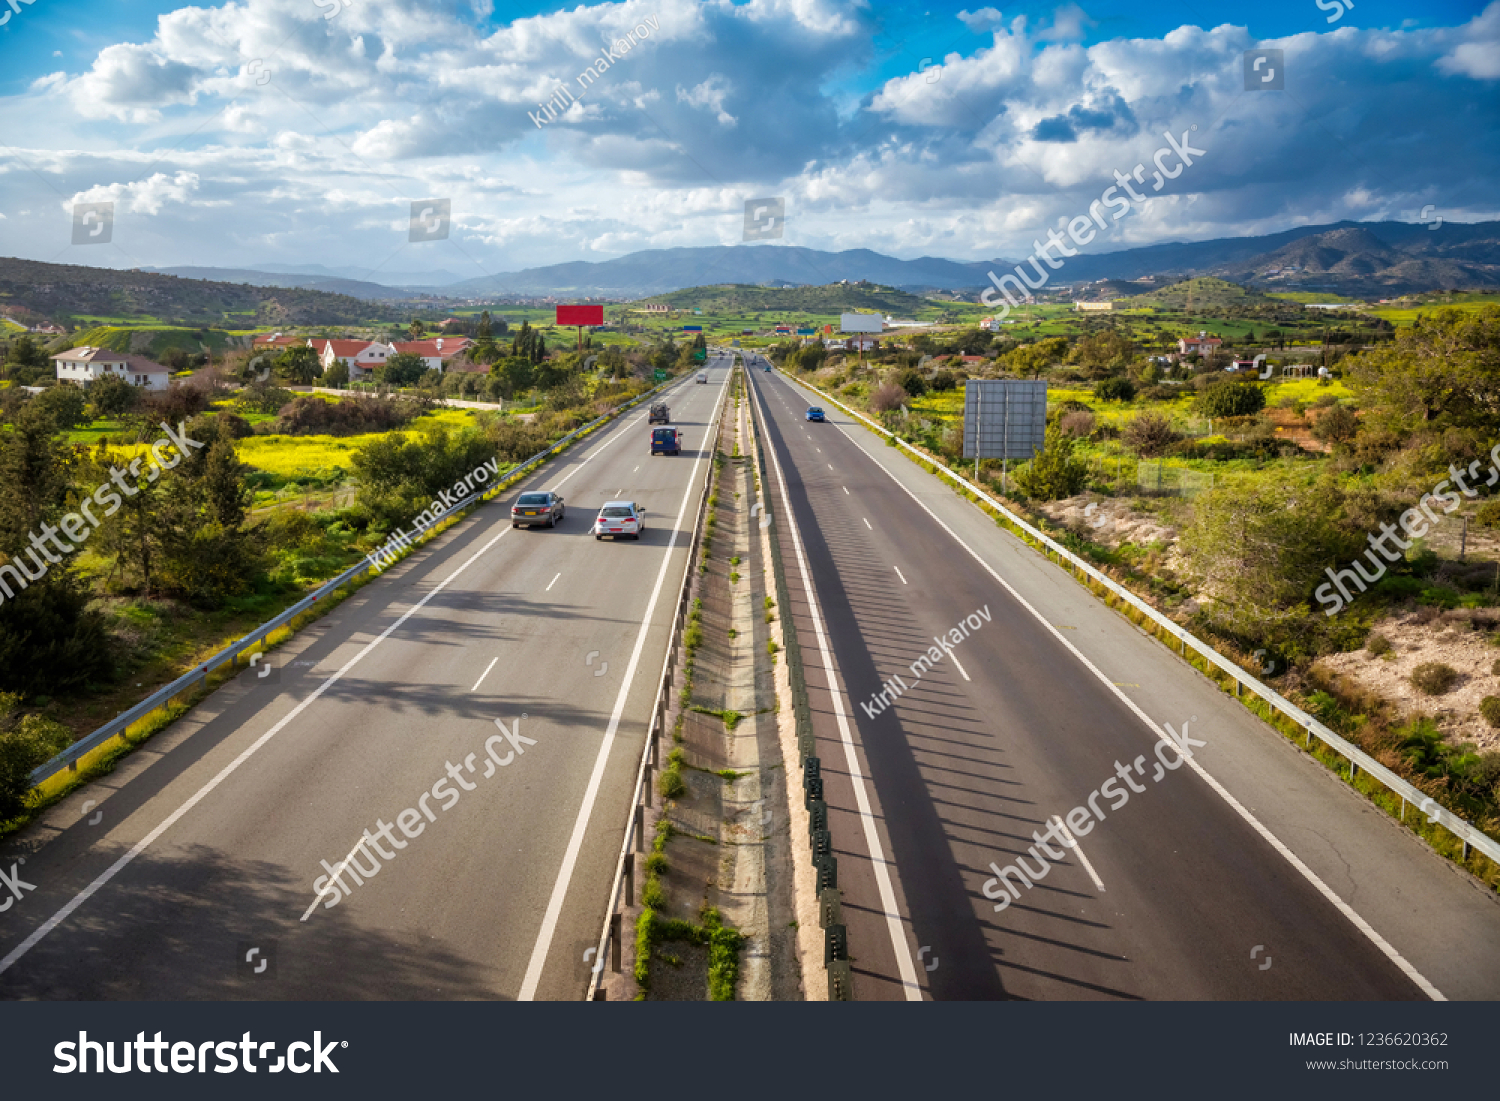 View of A1 motorway, locally referred to as the Nicosia-Limassol highway. Cyprus. #1236620362